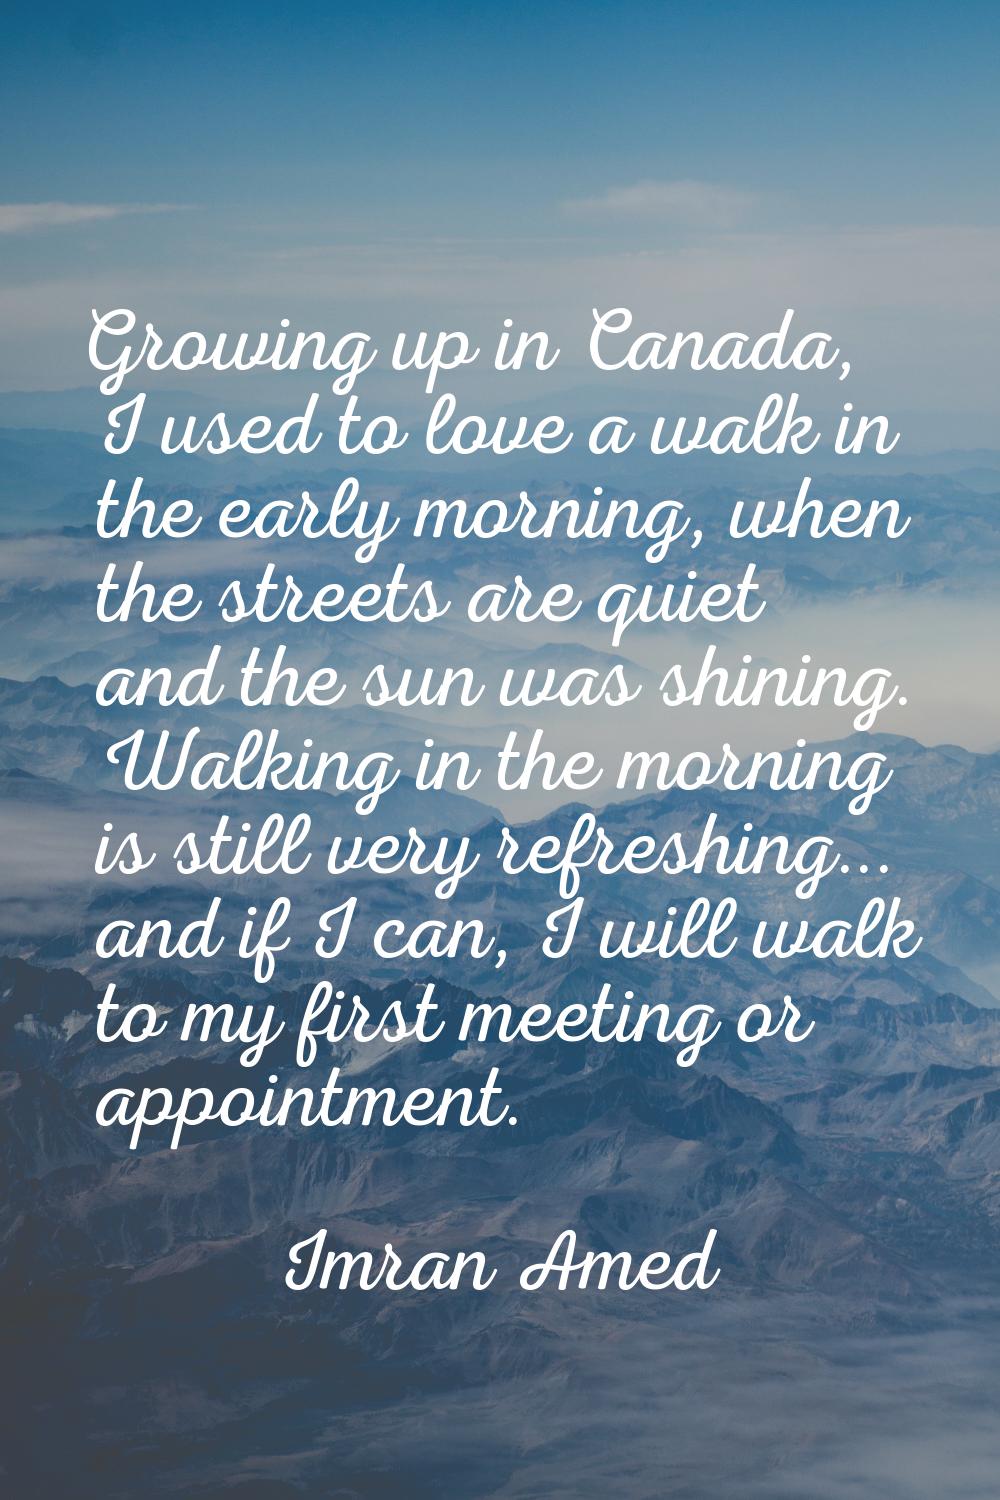 Growing up in Canada, I used to love a walk in the early morning, when the streets are quiet and th